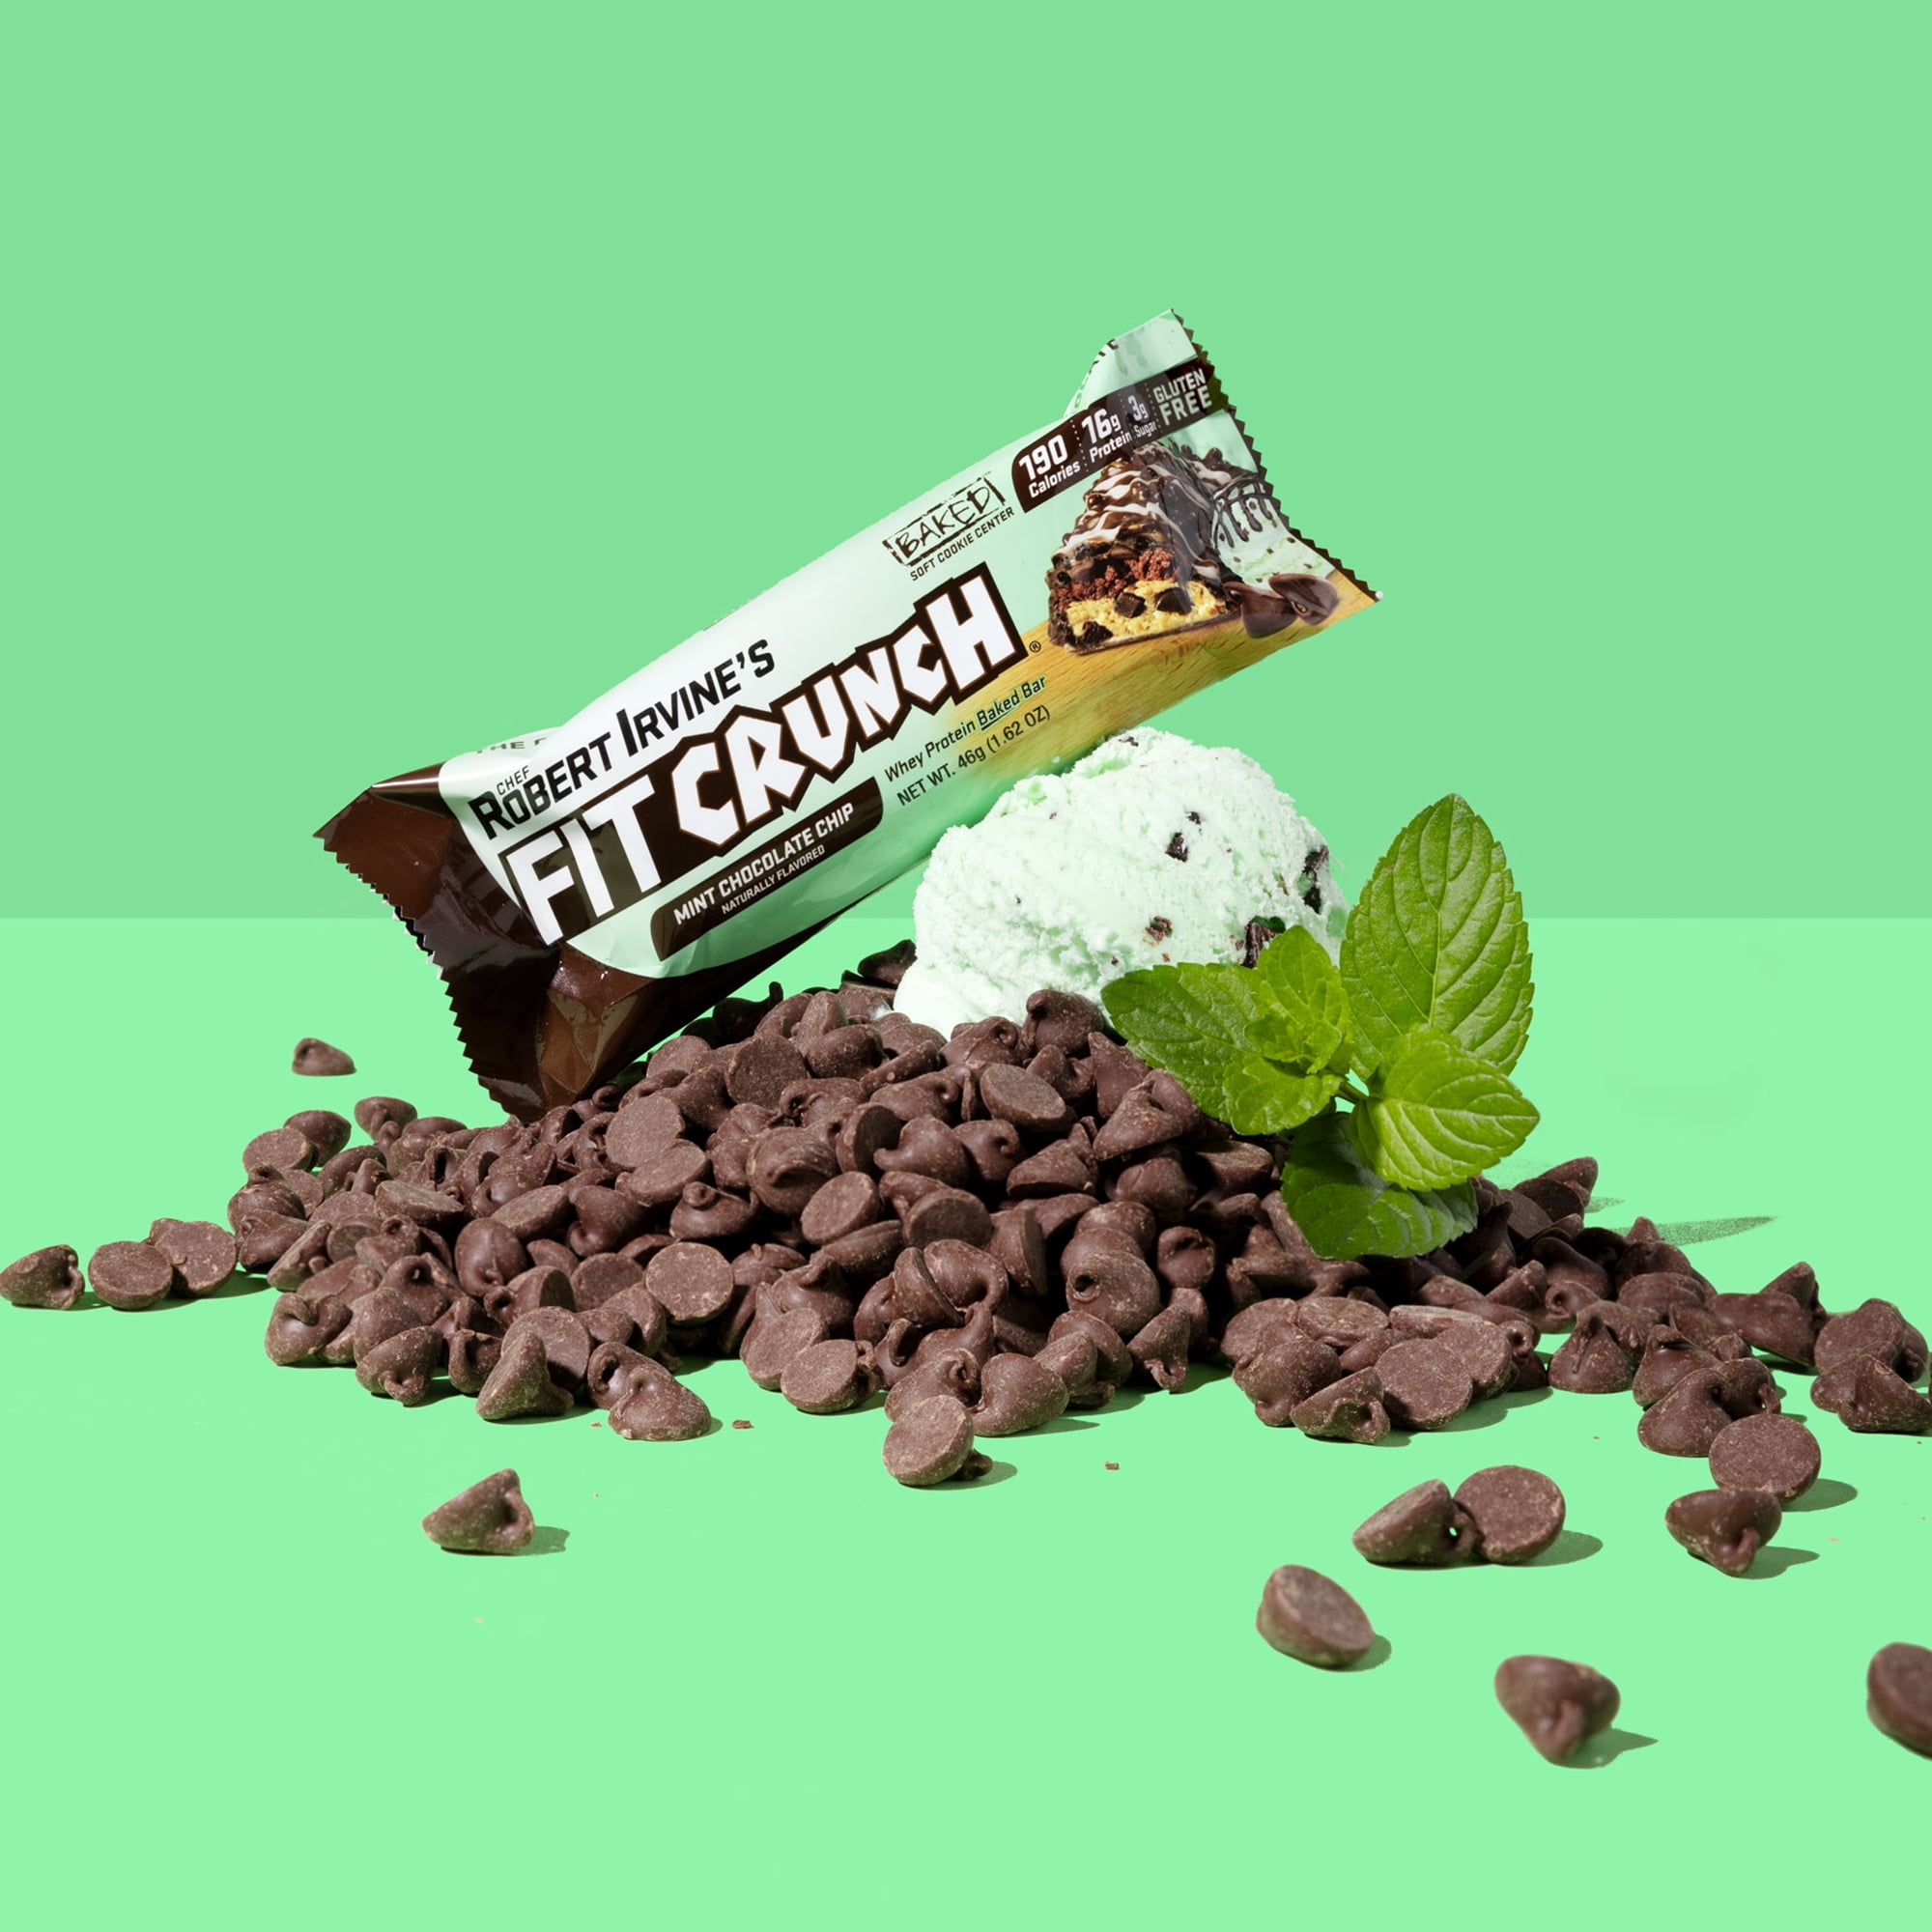 Chewy chocolate mint bars - 15g